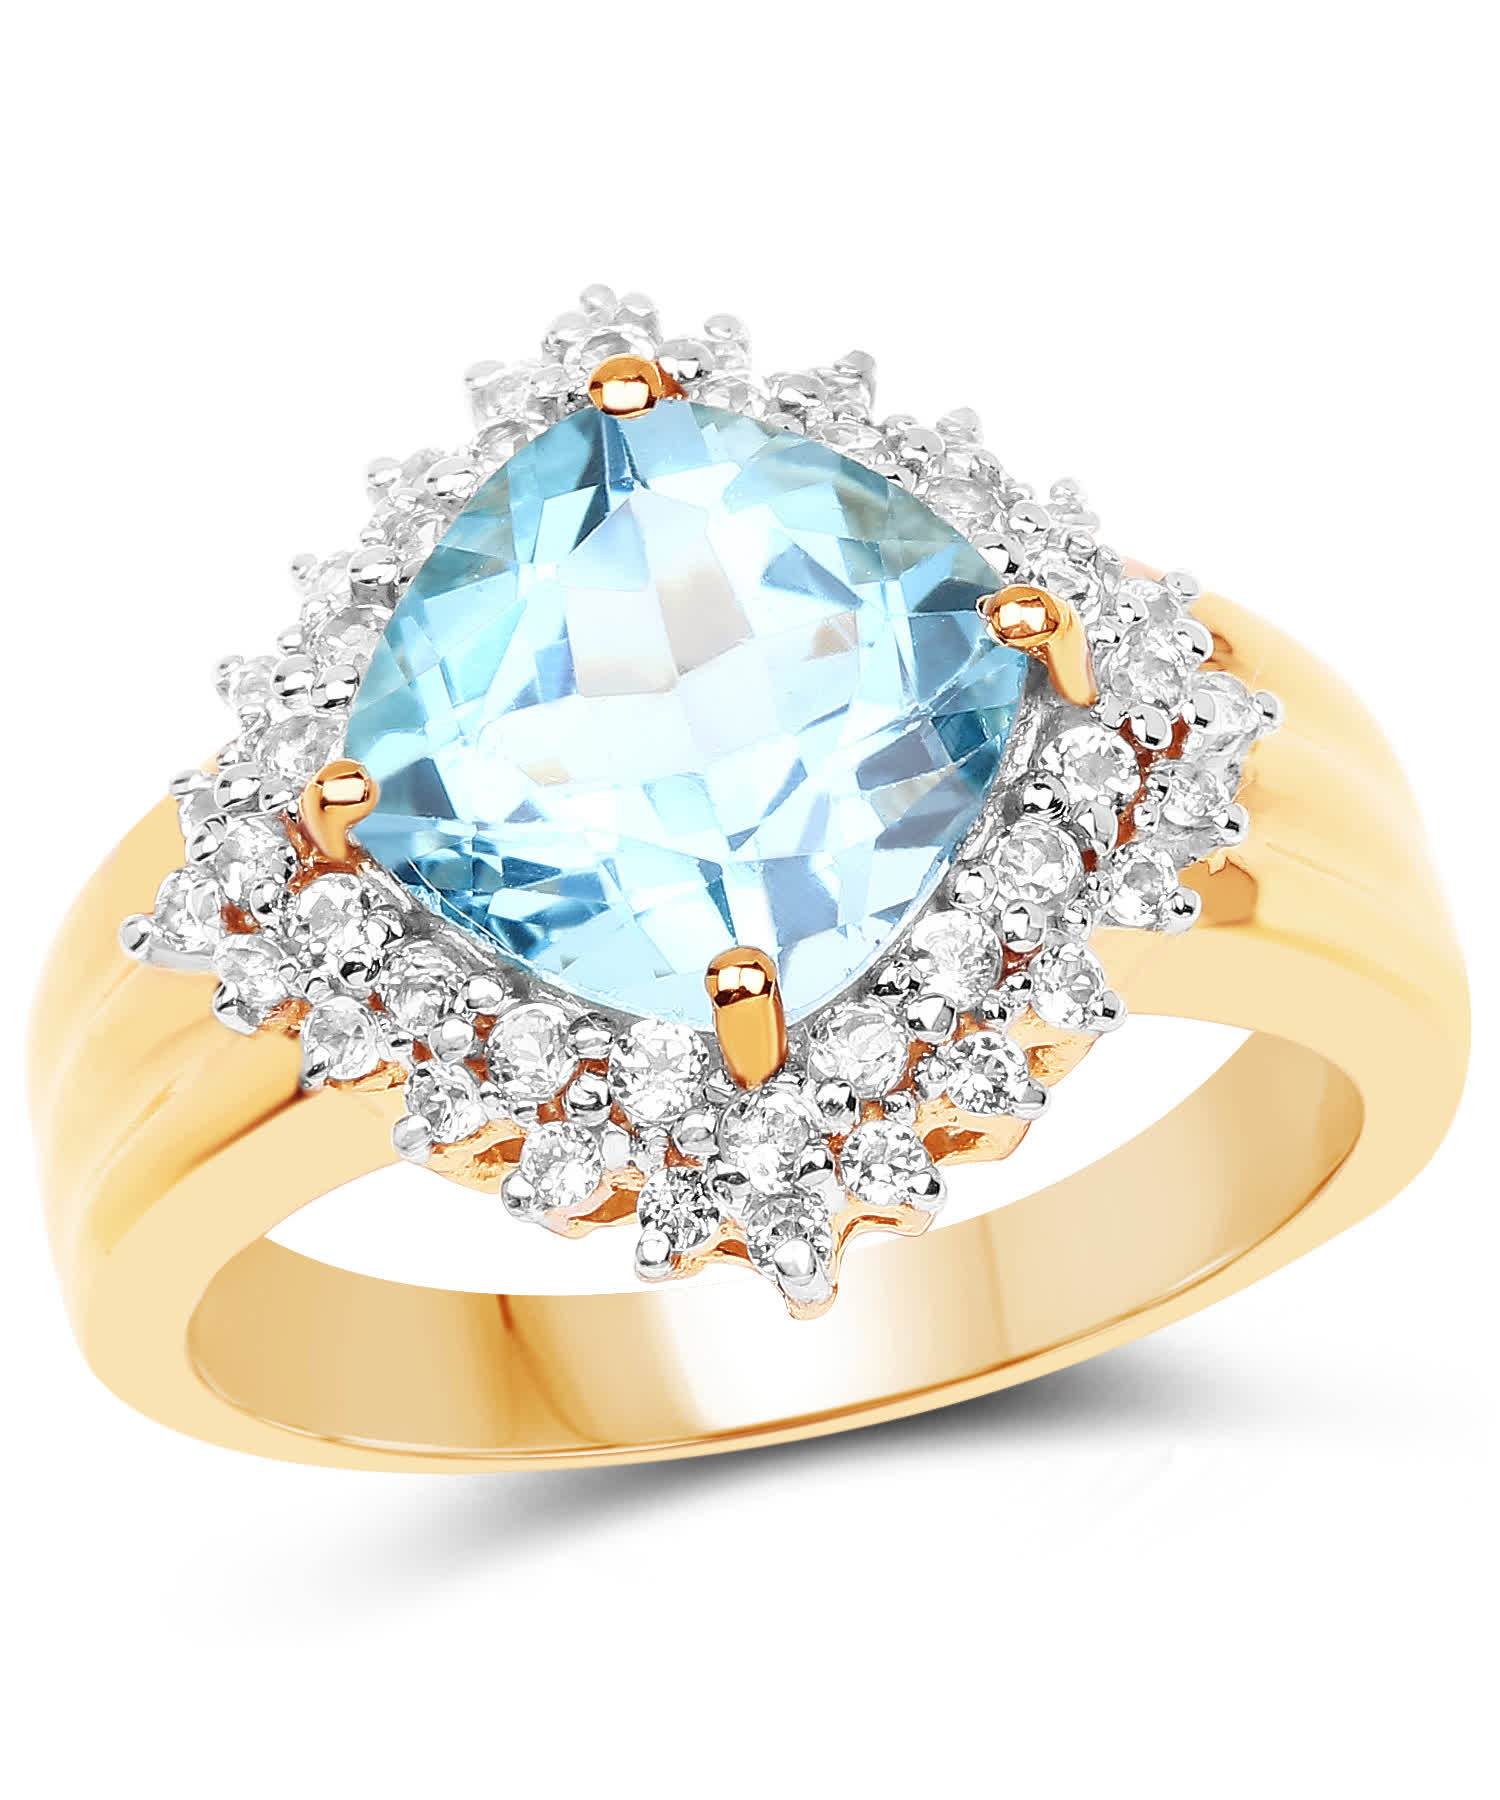 4.33ctw Natural Swiss Blue Topaz 14k Gold Plated 925 Sterling Silver Cocktail Ring View 1